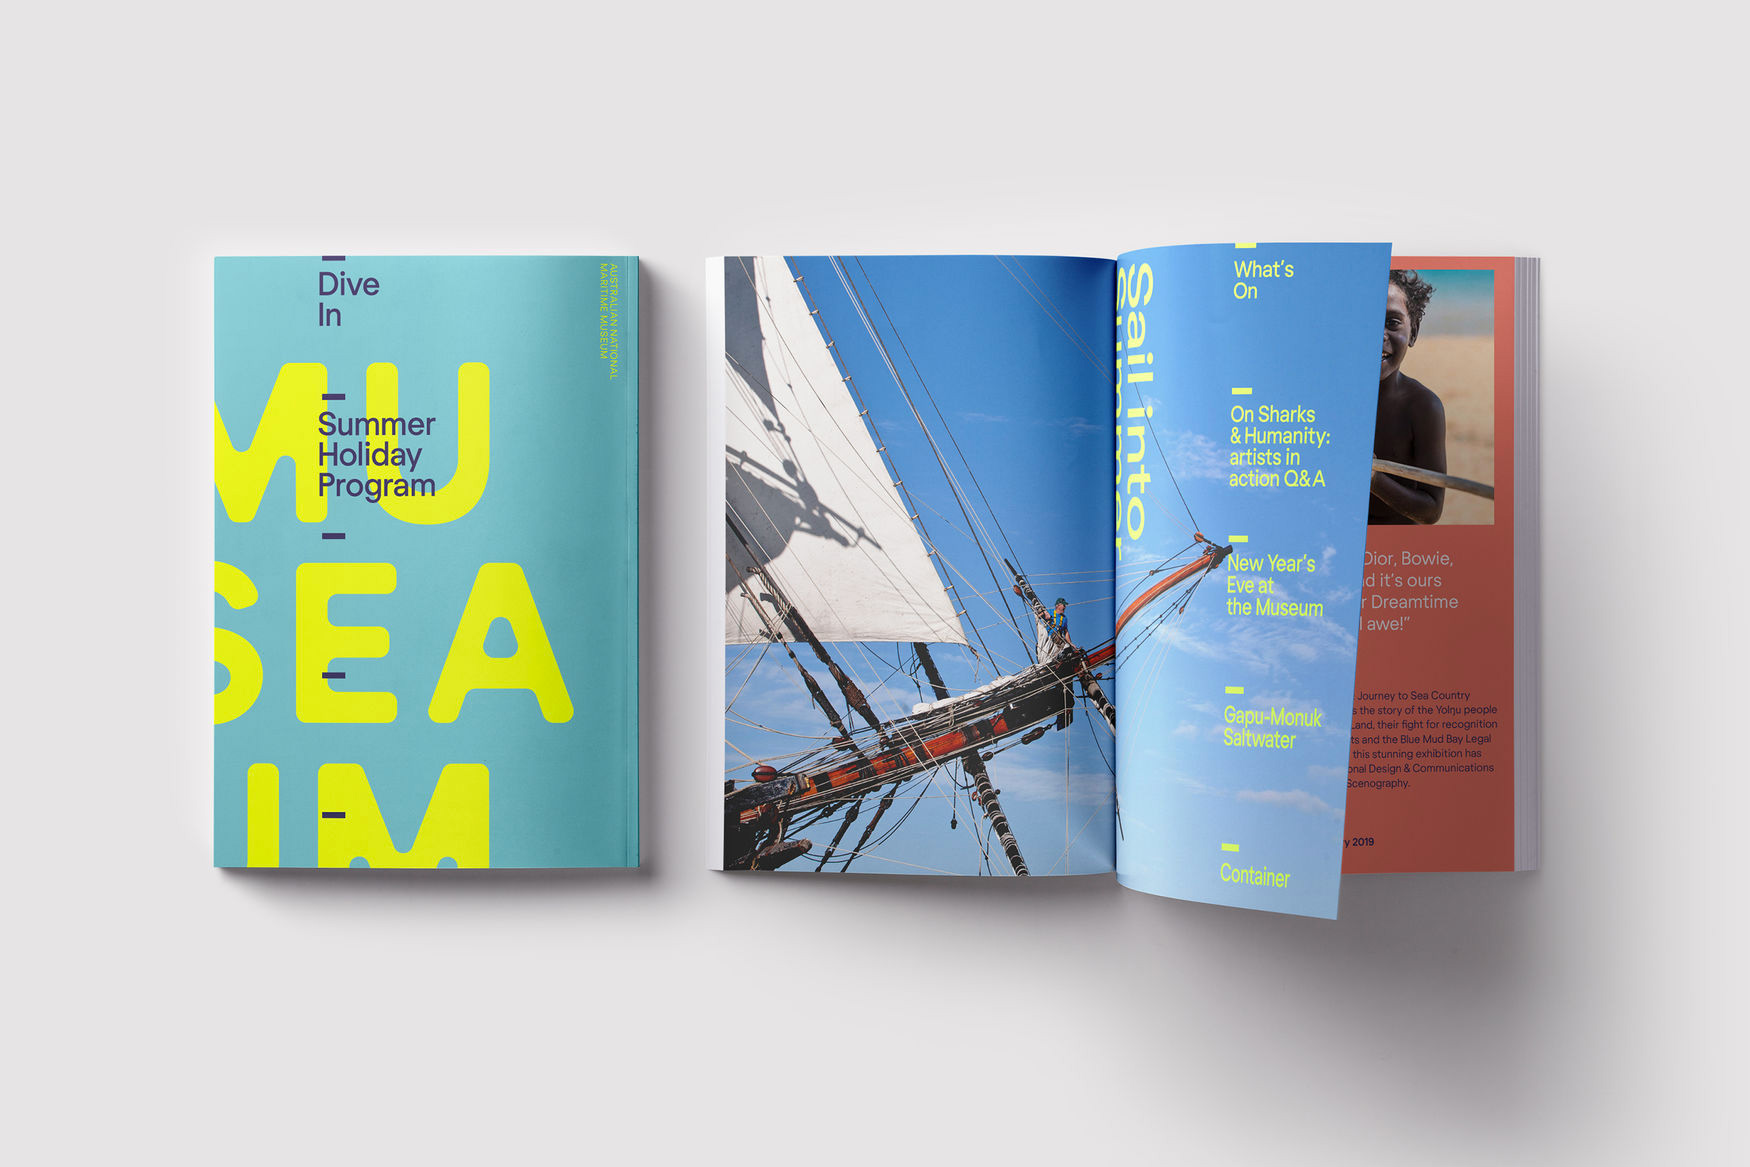 New Logo and Identity for Australian National Maritime Museum by Frost*